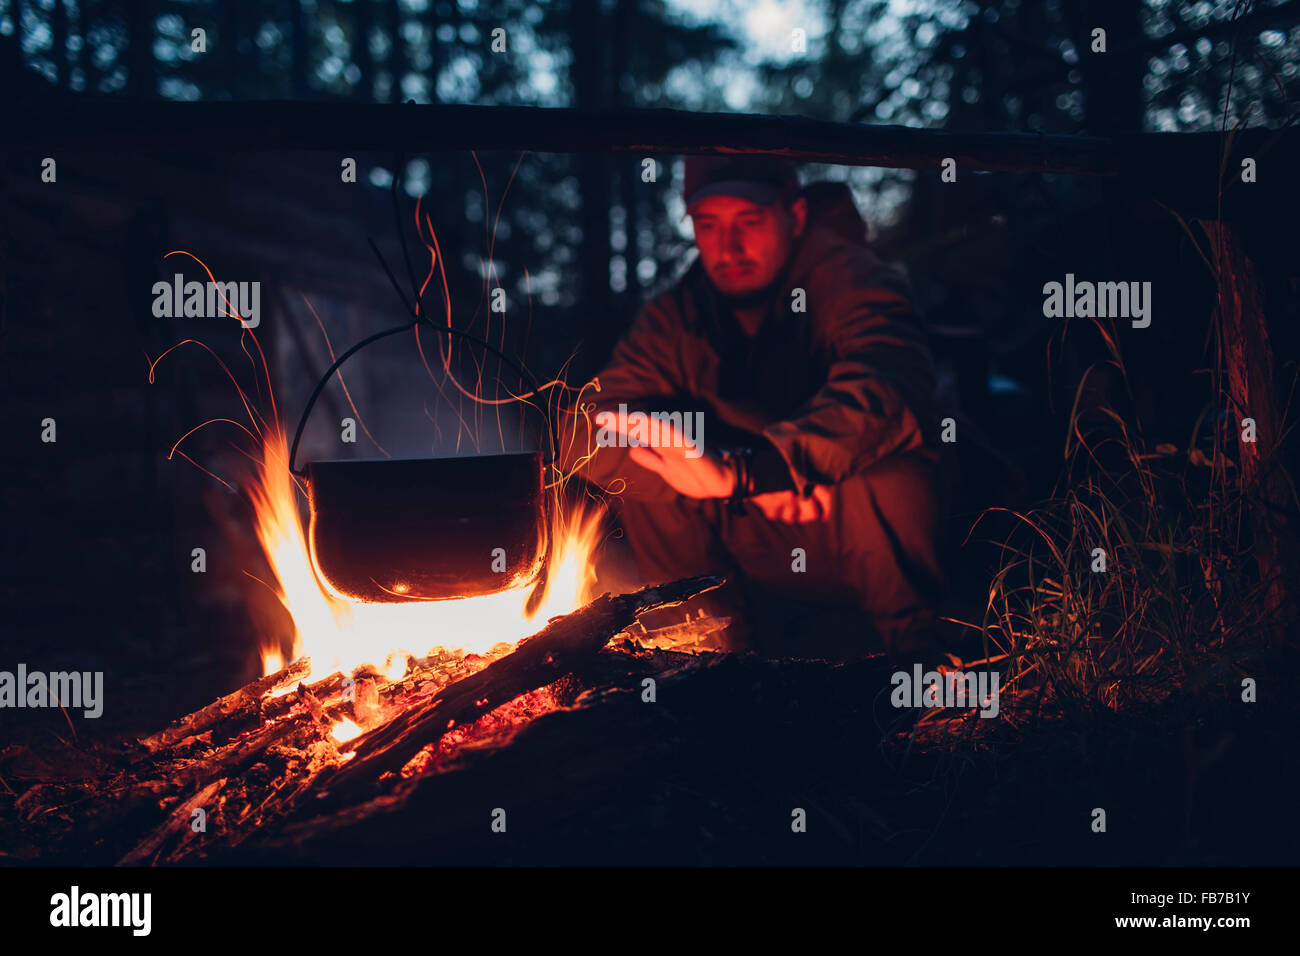 Mid adult man warming hands at campsite Stock Photo